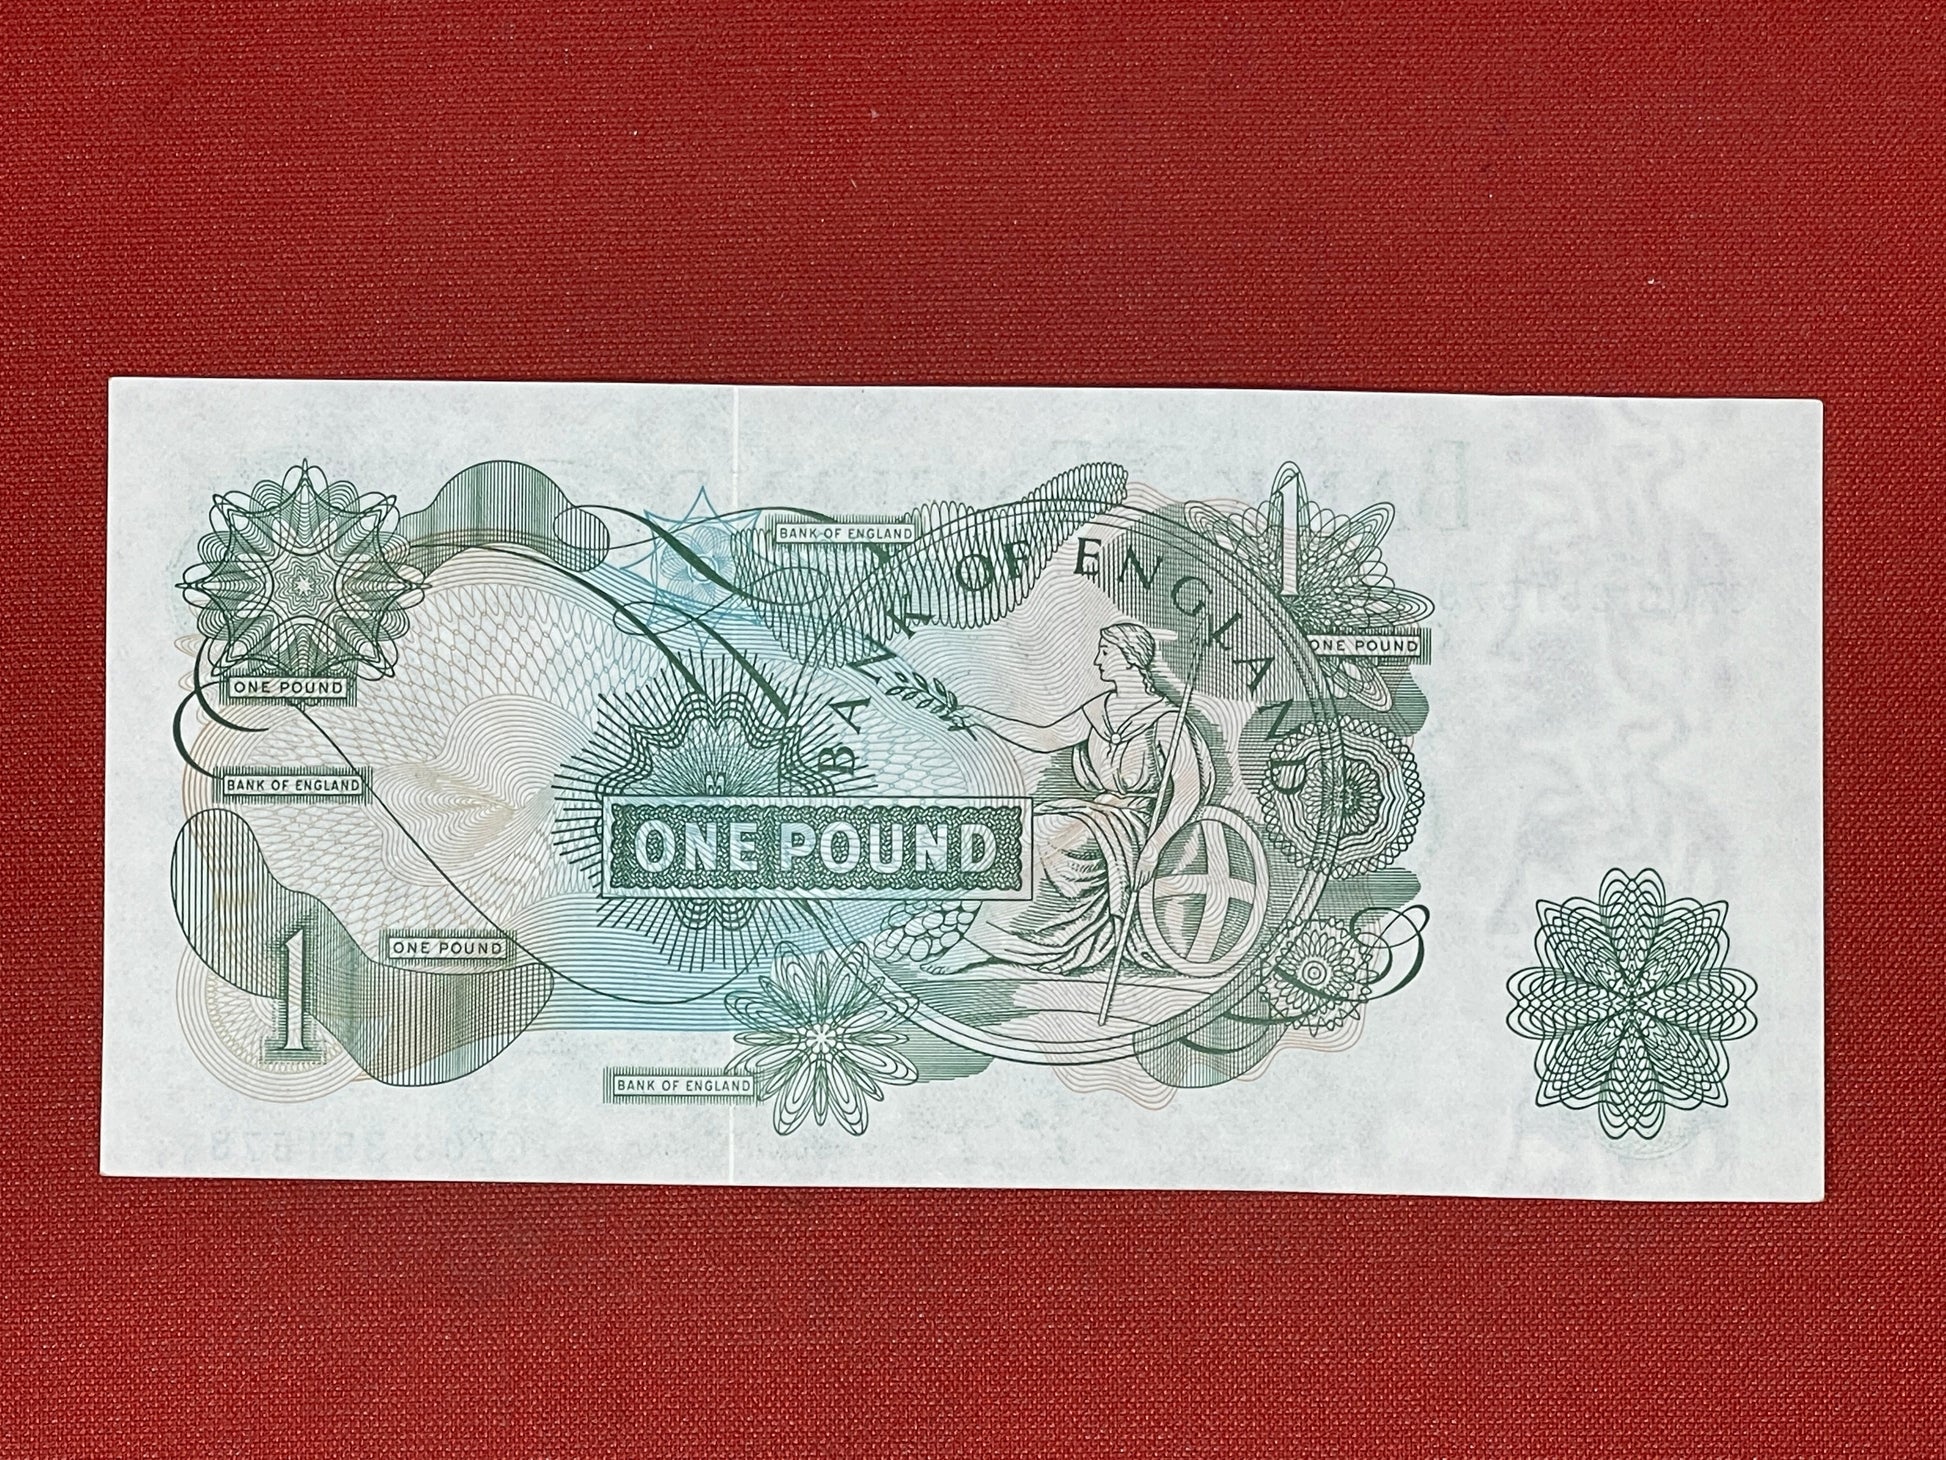 Bank of England £1 Banknote Signed J Page 1970 - 1980 ( Dugg B322 ) 